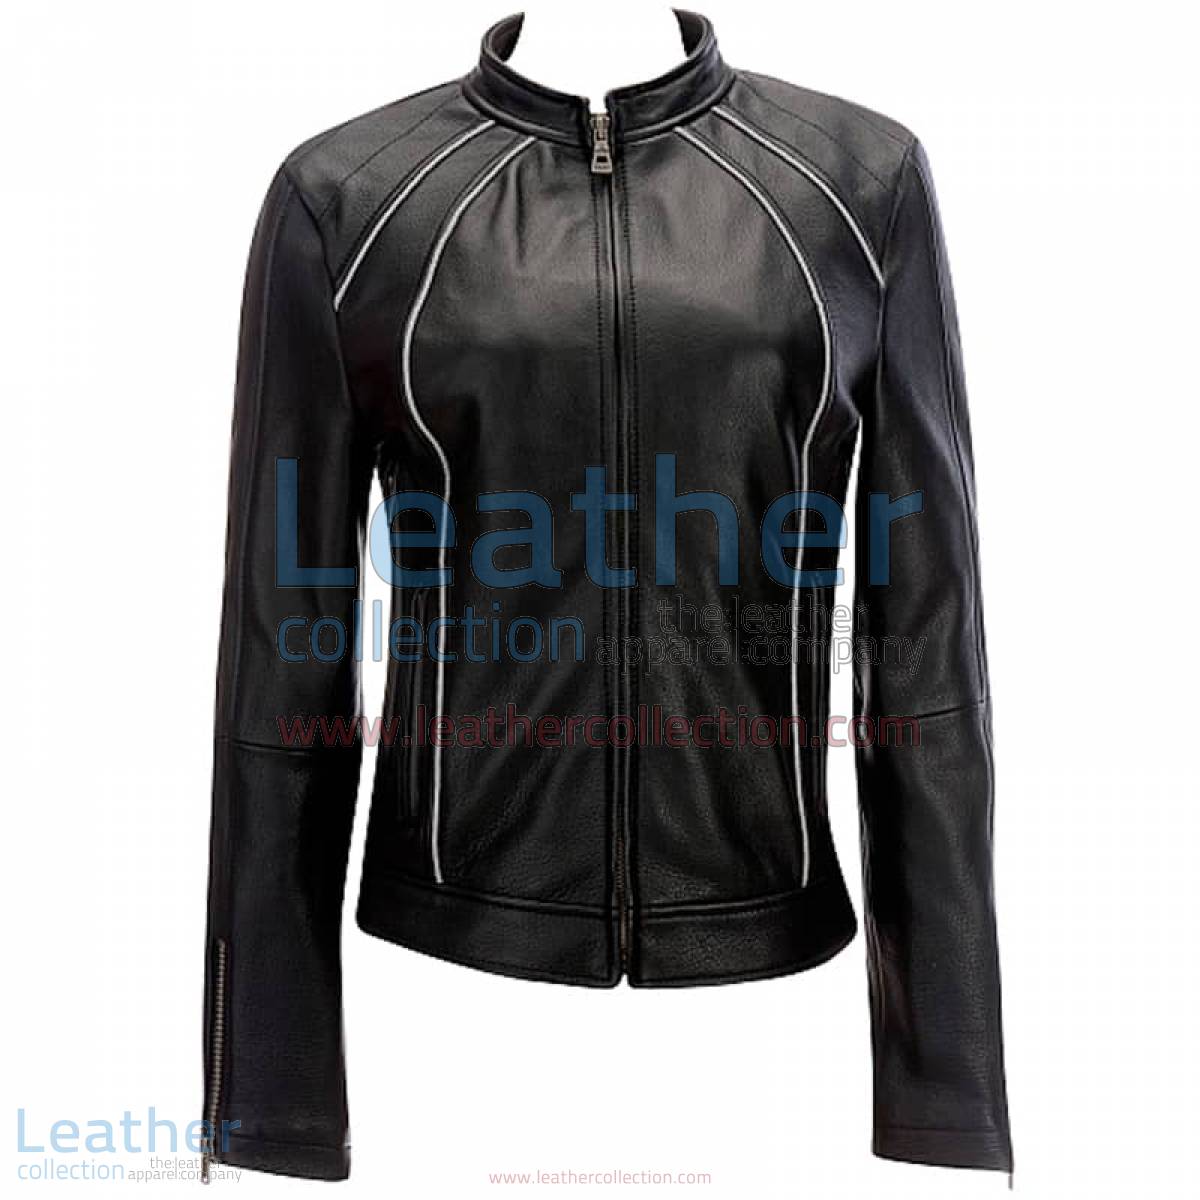 Leather Ladies Jacket With Piping